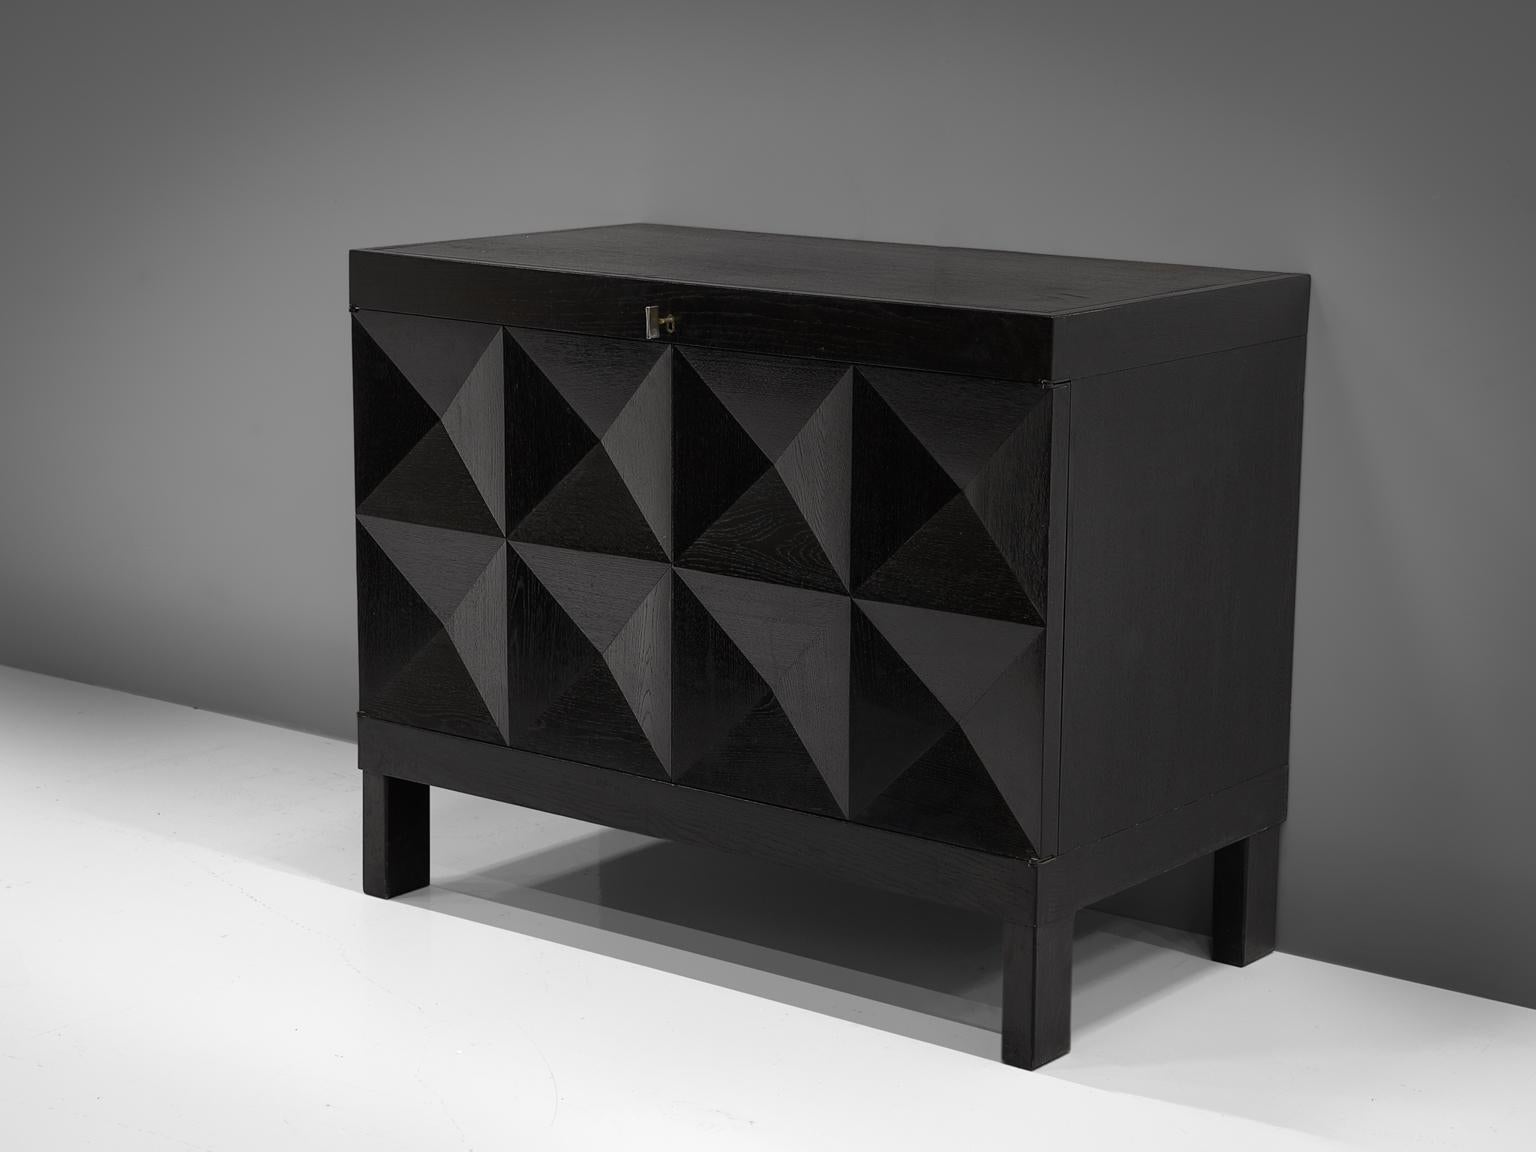 De Coene, cabinet in stained oak, Belgium, 1970s. 

This small sideboard with geometric doors is executed by De Coene. The credenza shows a pyramid like pattern on its doors. The squares on the front are each divided in four quarters and the chest